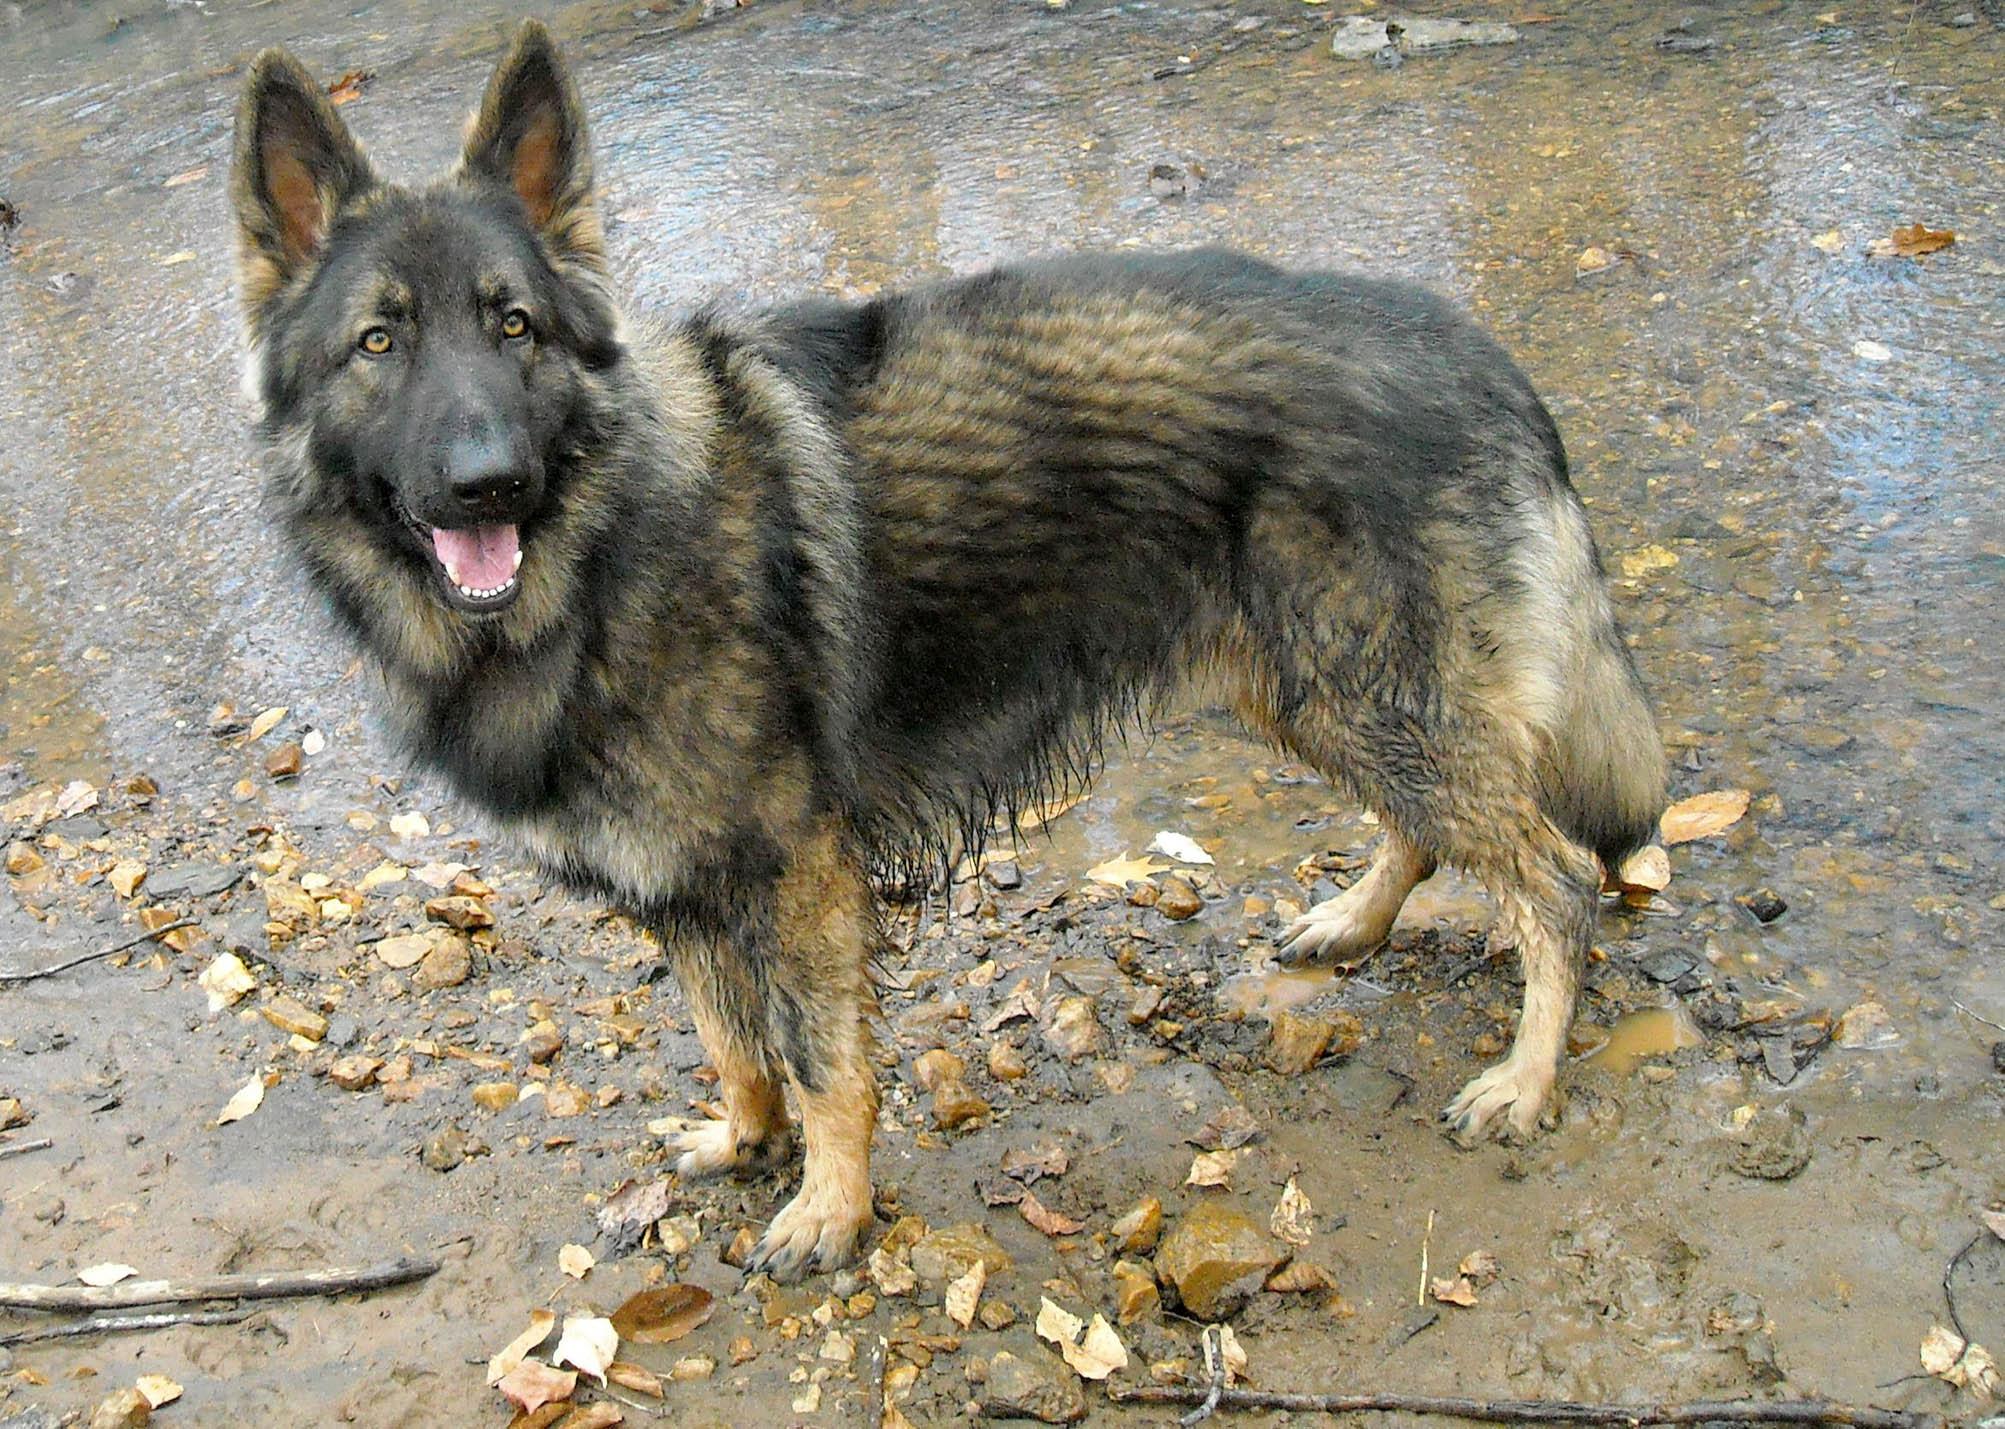 Shiloh Shepherd Dog: Shiloh Shiloh Shepherd Dog On The Road Breed